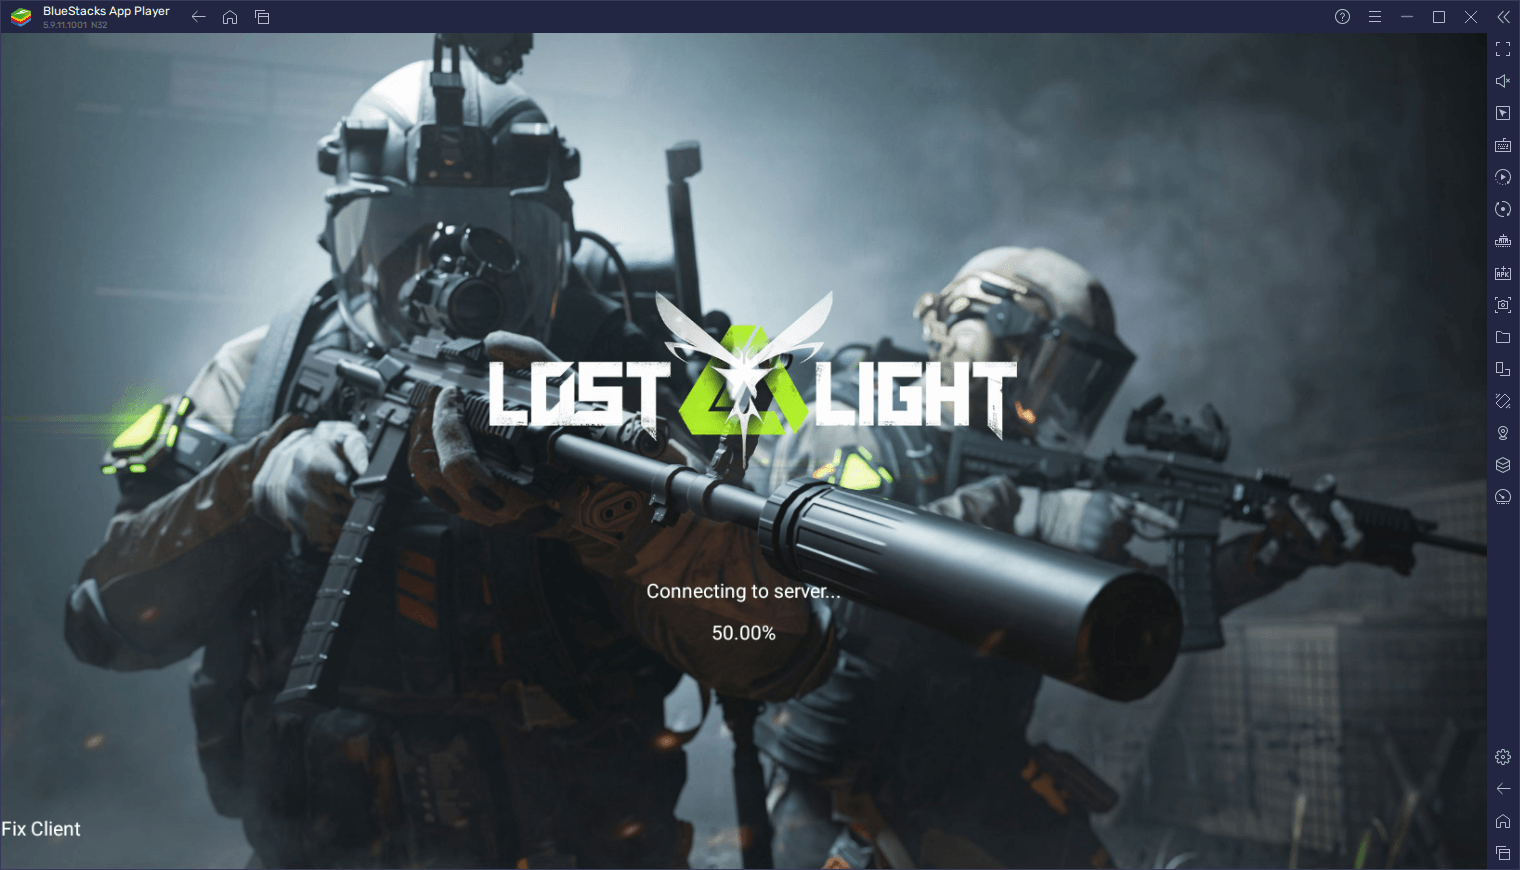 How to Play Lost Light – PVPVE on PC with BlueStacks